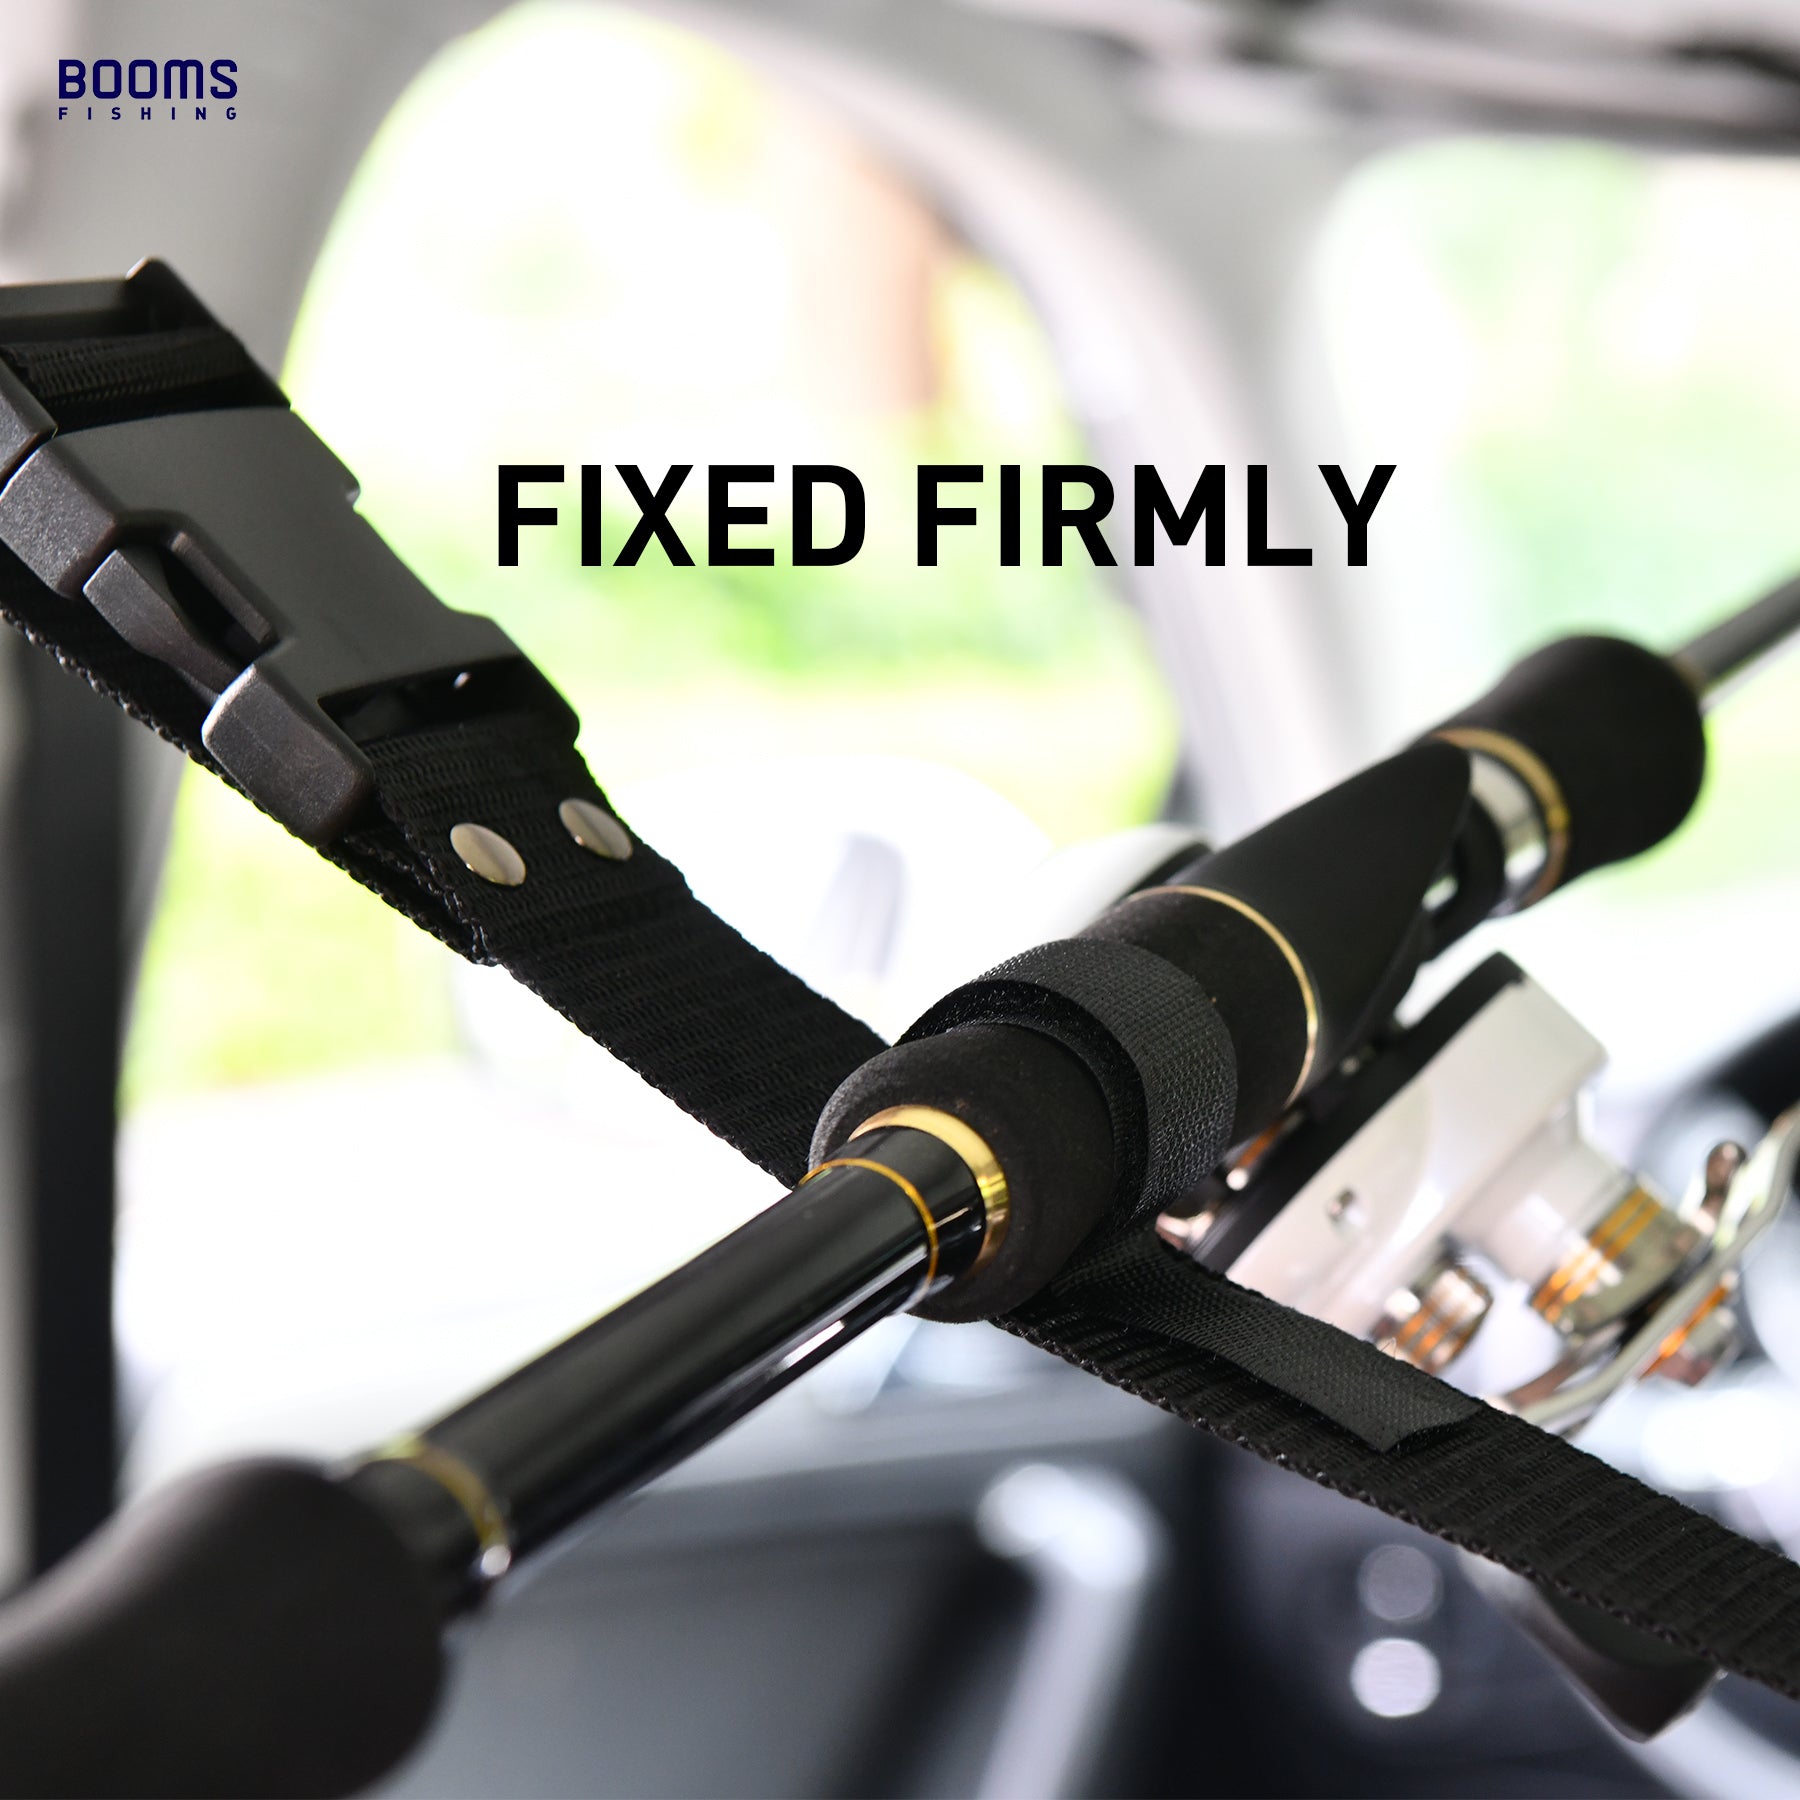 VRC Vehicle Rod Carrier Straps System – Booms Fishing Official